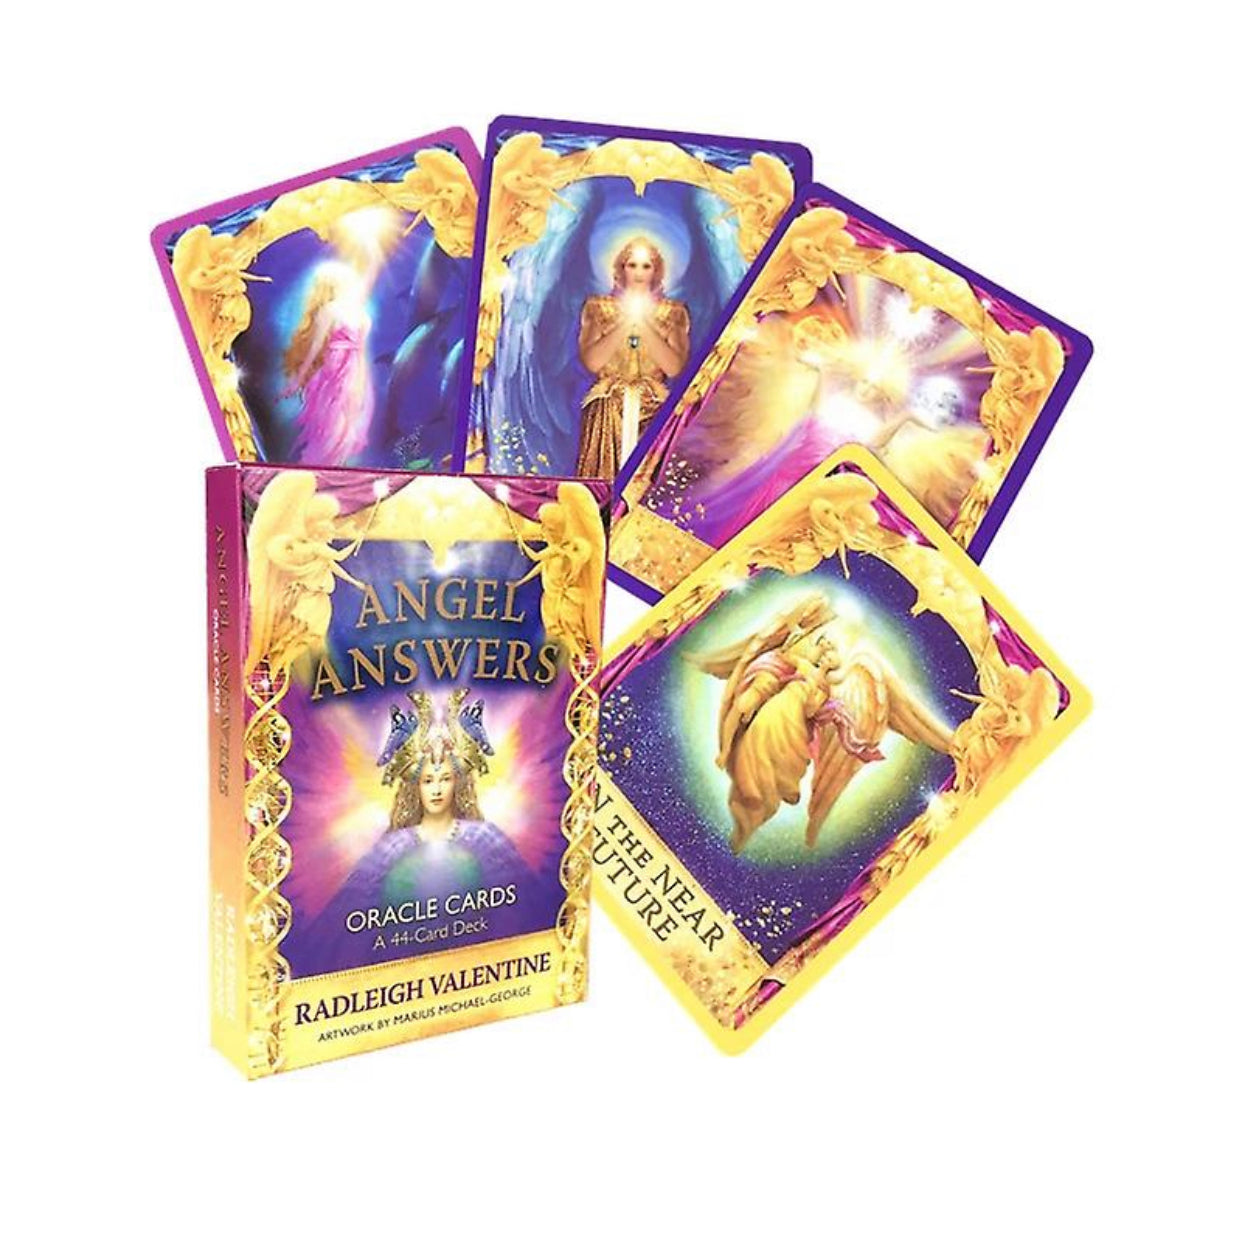 ORACLE CARDS || ANGEL ANSWERS